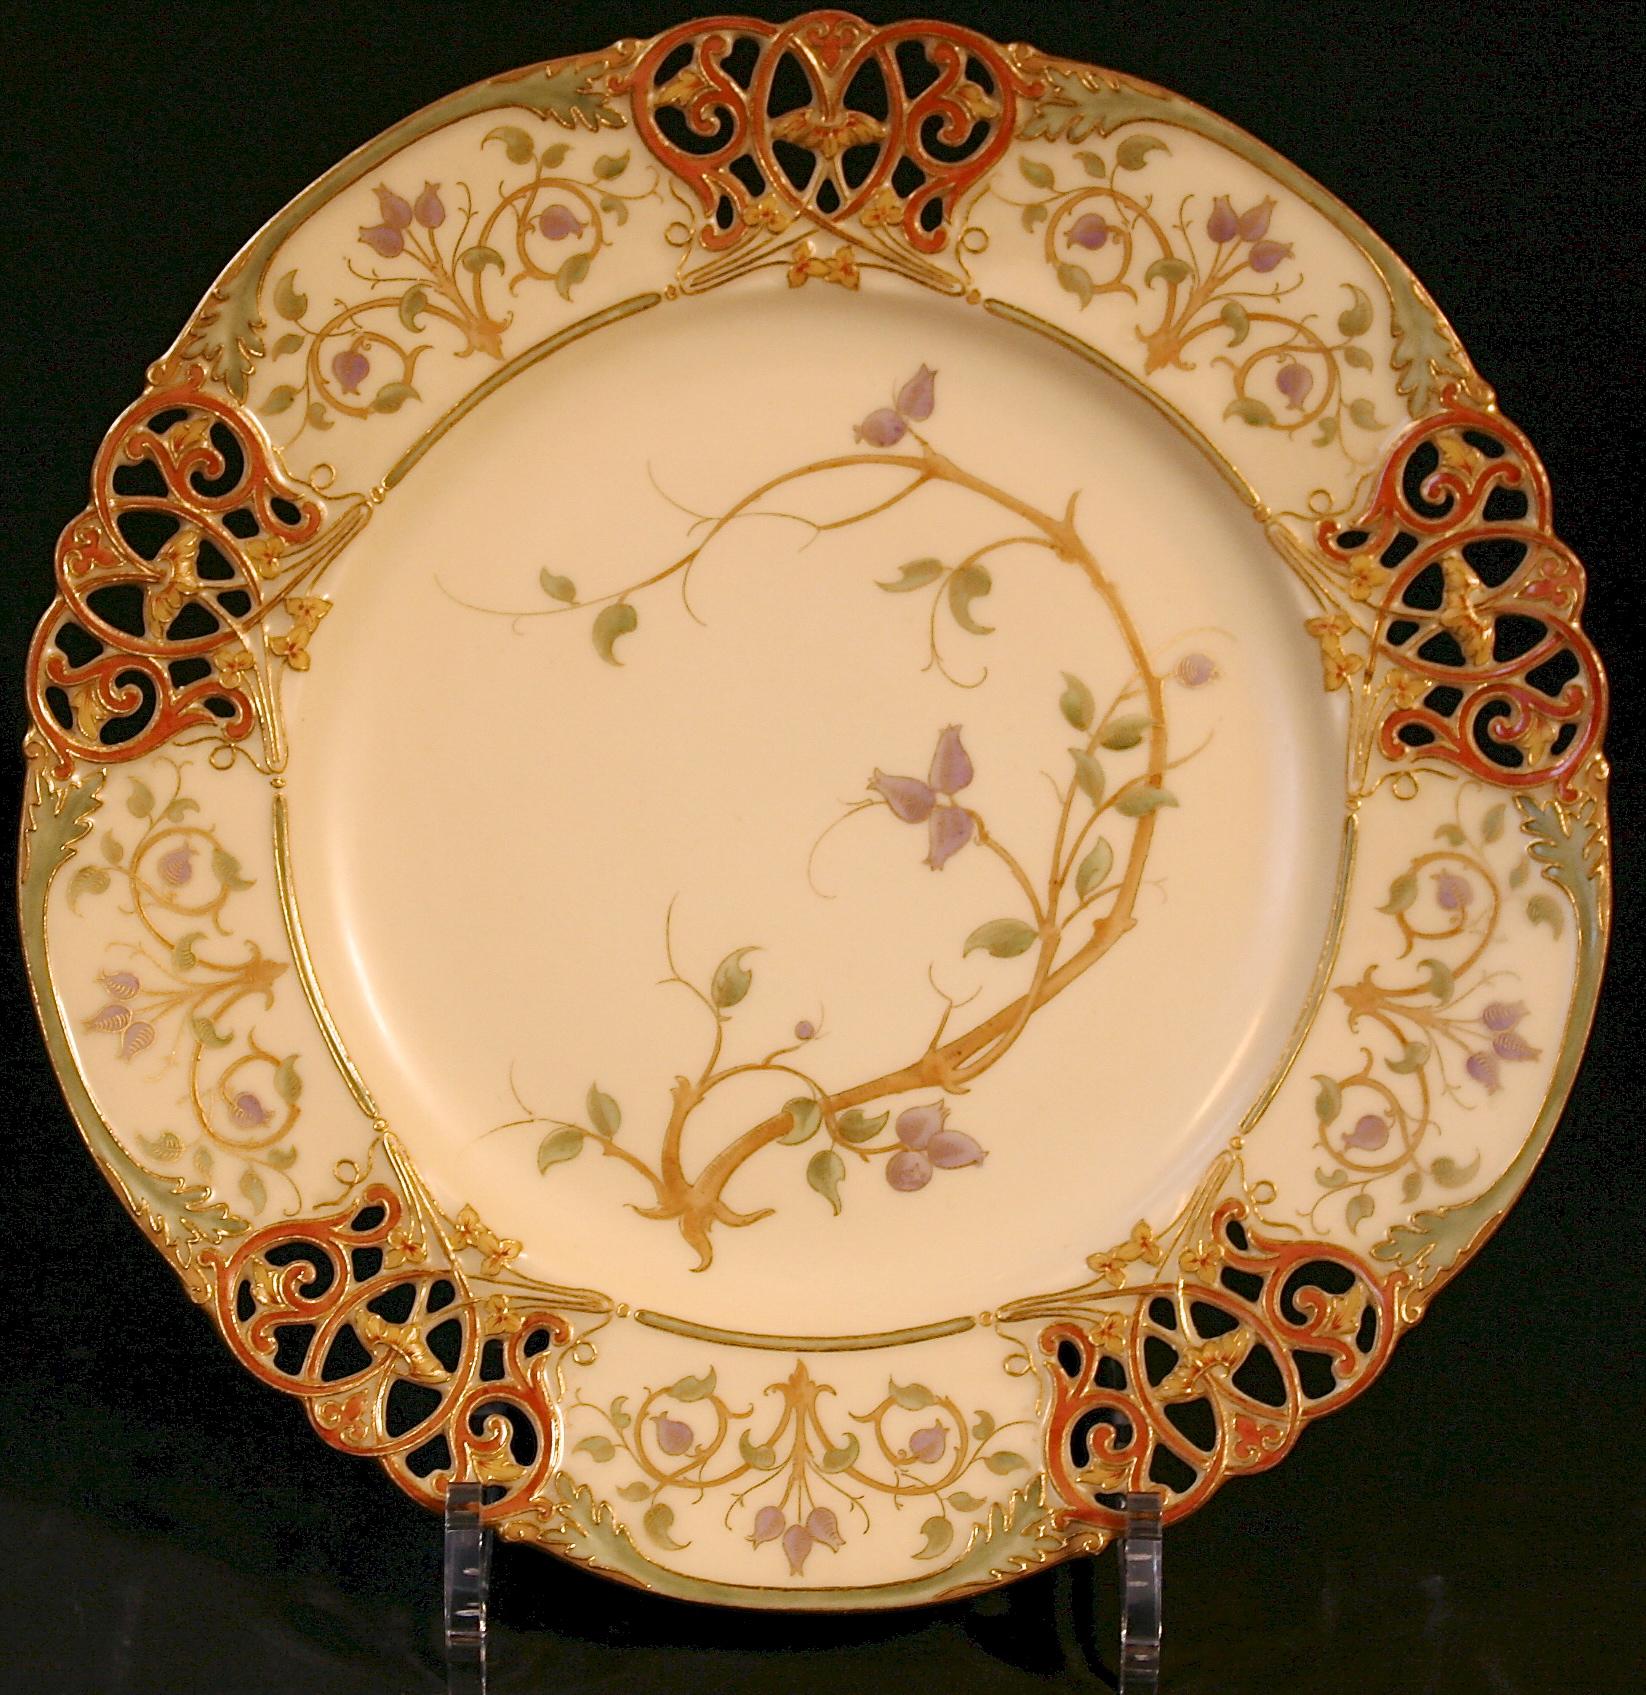 Large service of 15 hand painted and reticulated or pierced plates from the esteemed English firm of Royal Worcester. Each plates is elegantly painted in a naturalistic style with a different species of wildflower. The rim is decorated with 3 panels